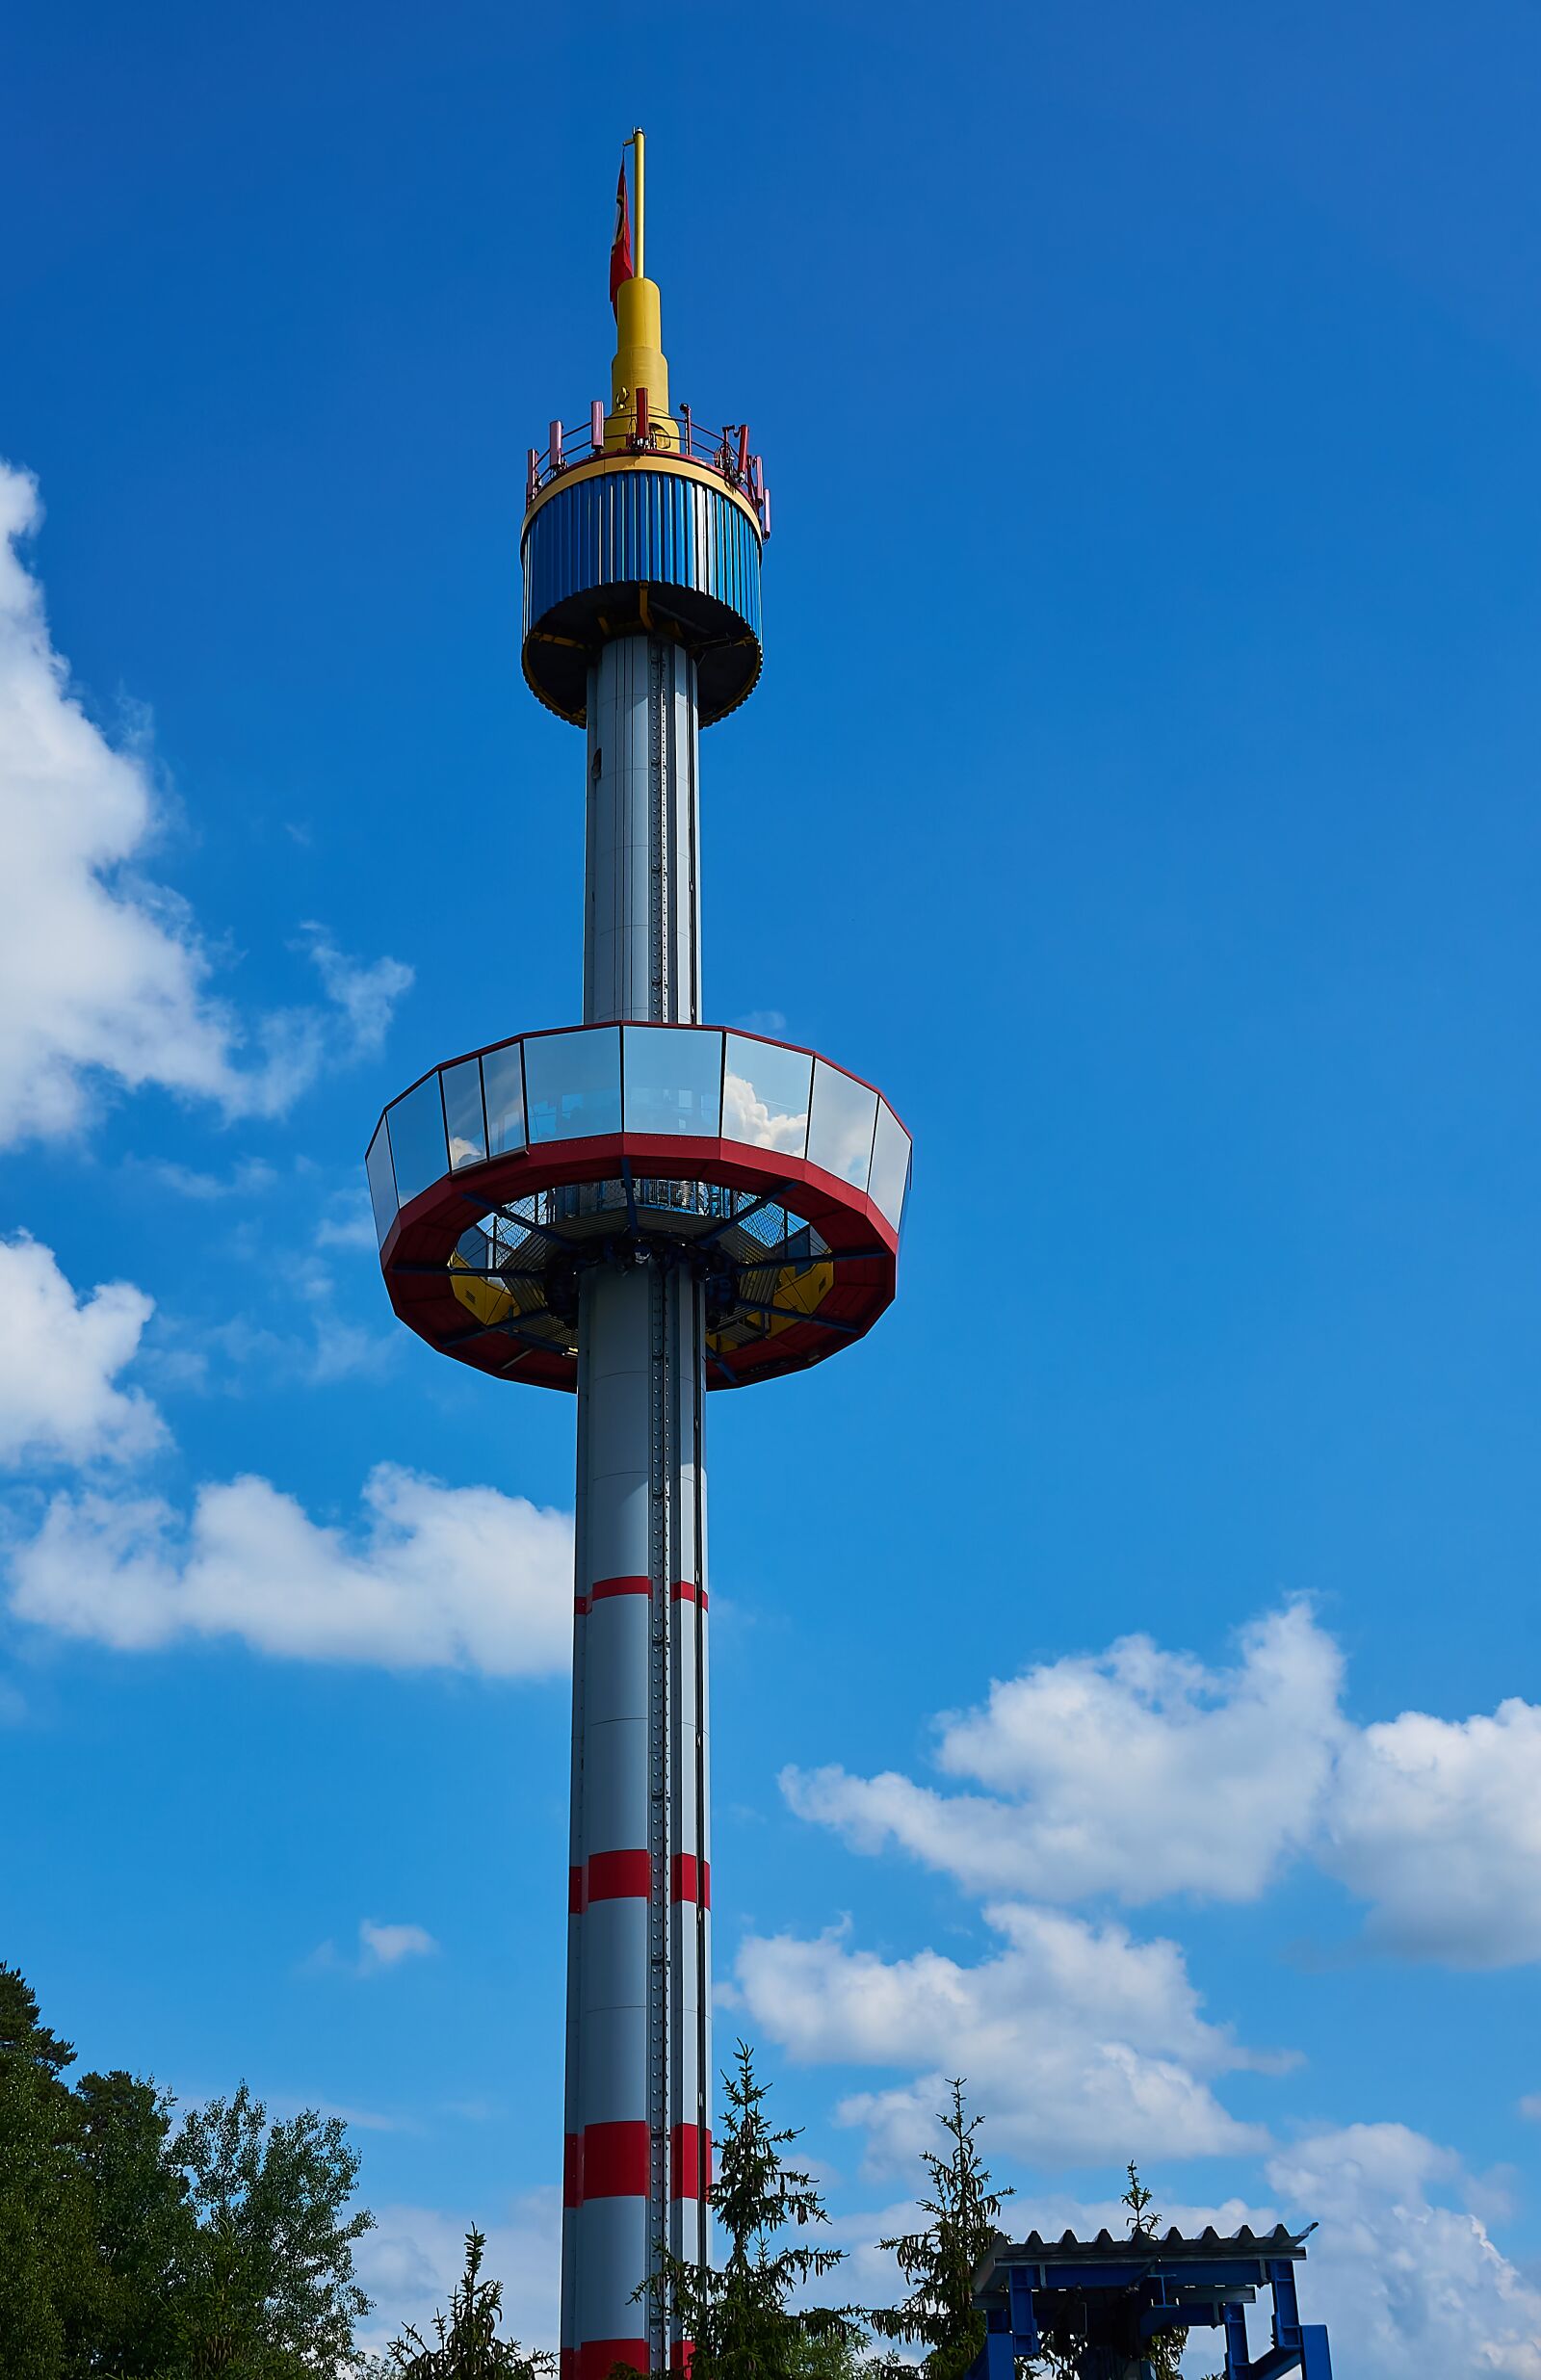 Sony a6000 + Sony E PZ 16-50 mm F3.5-5.6 OSS (SELP1650) sample photo. Legoland, observation tower, panoramic photography